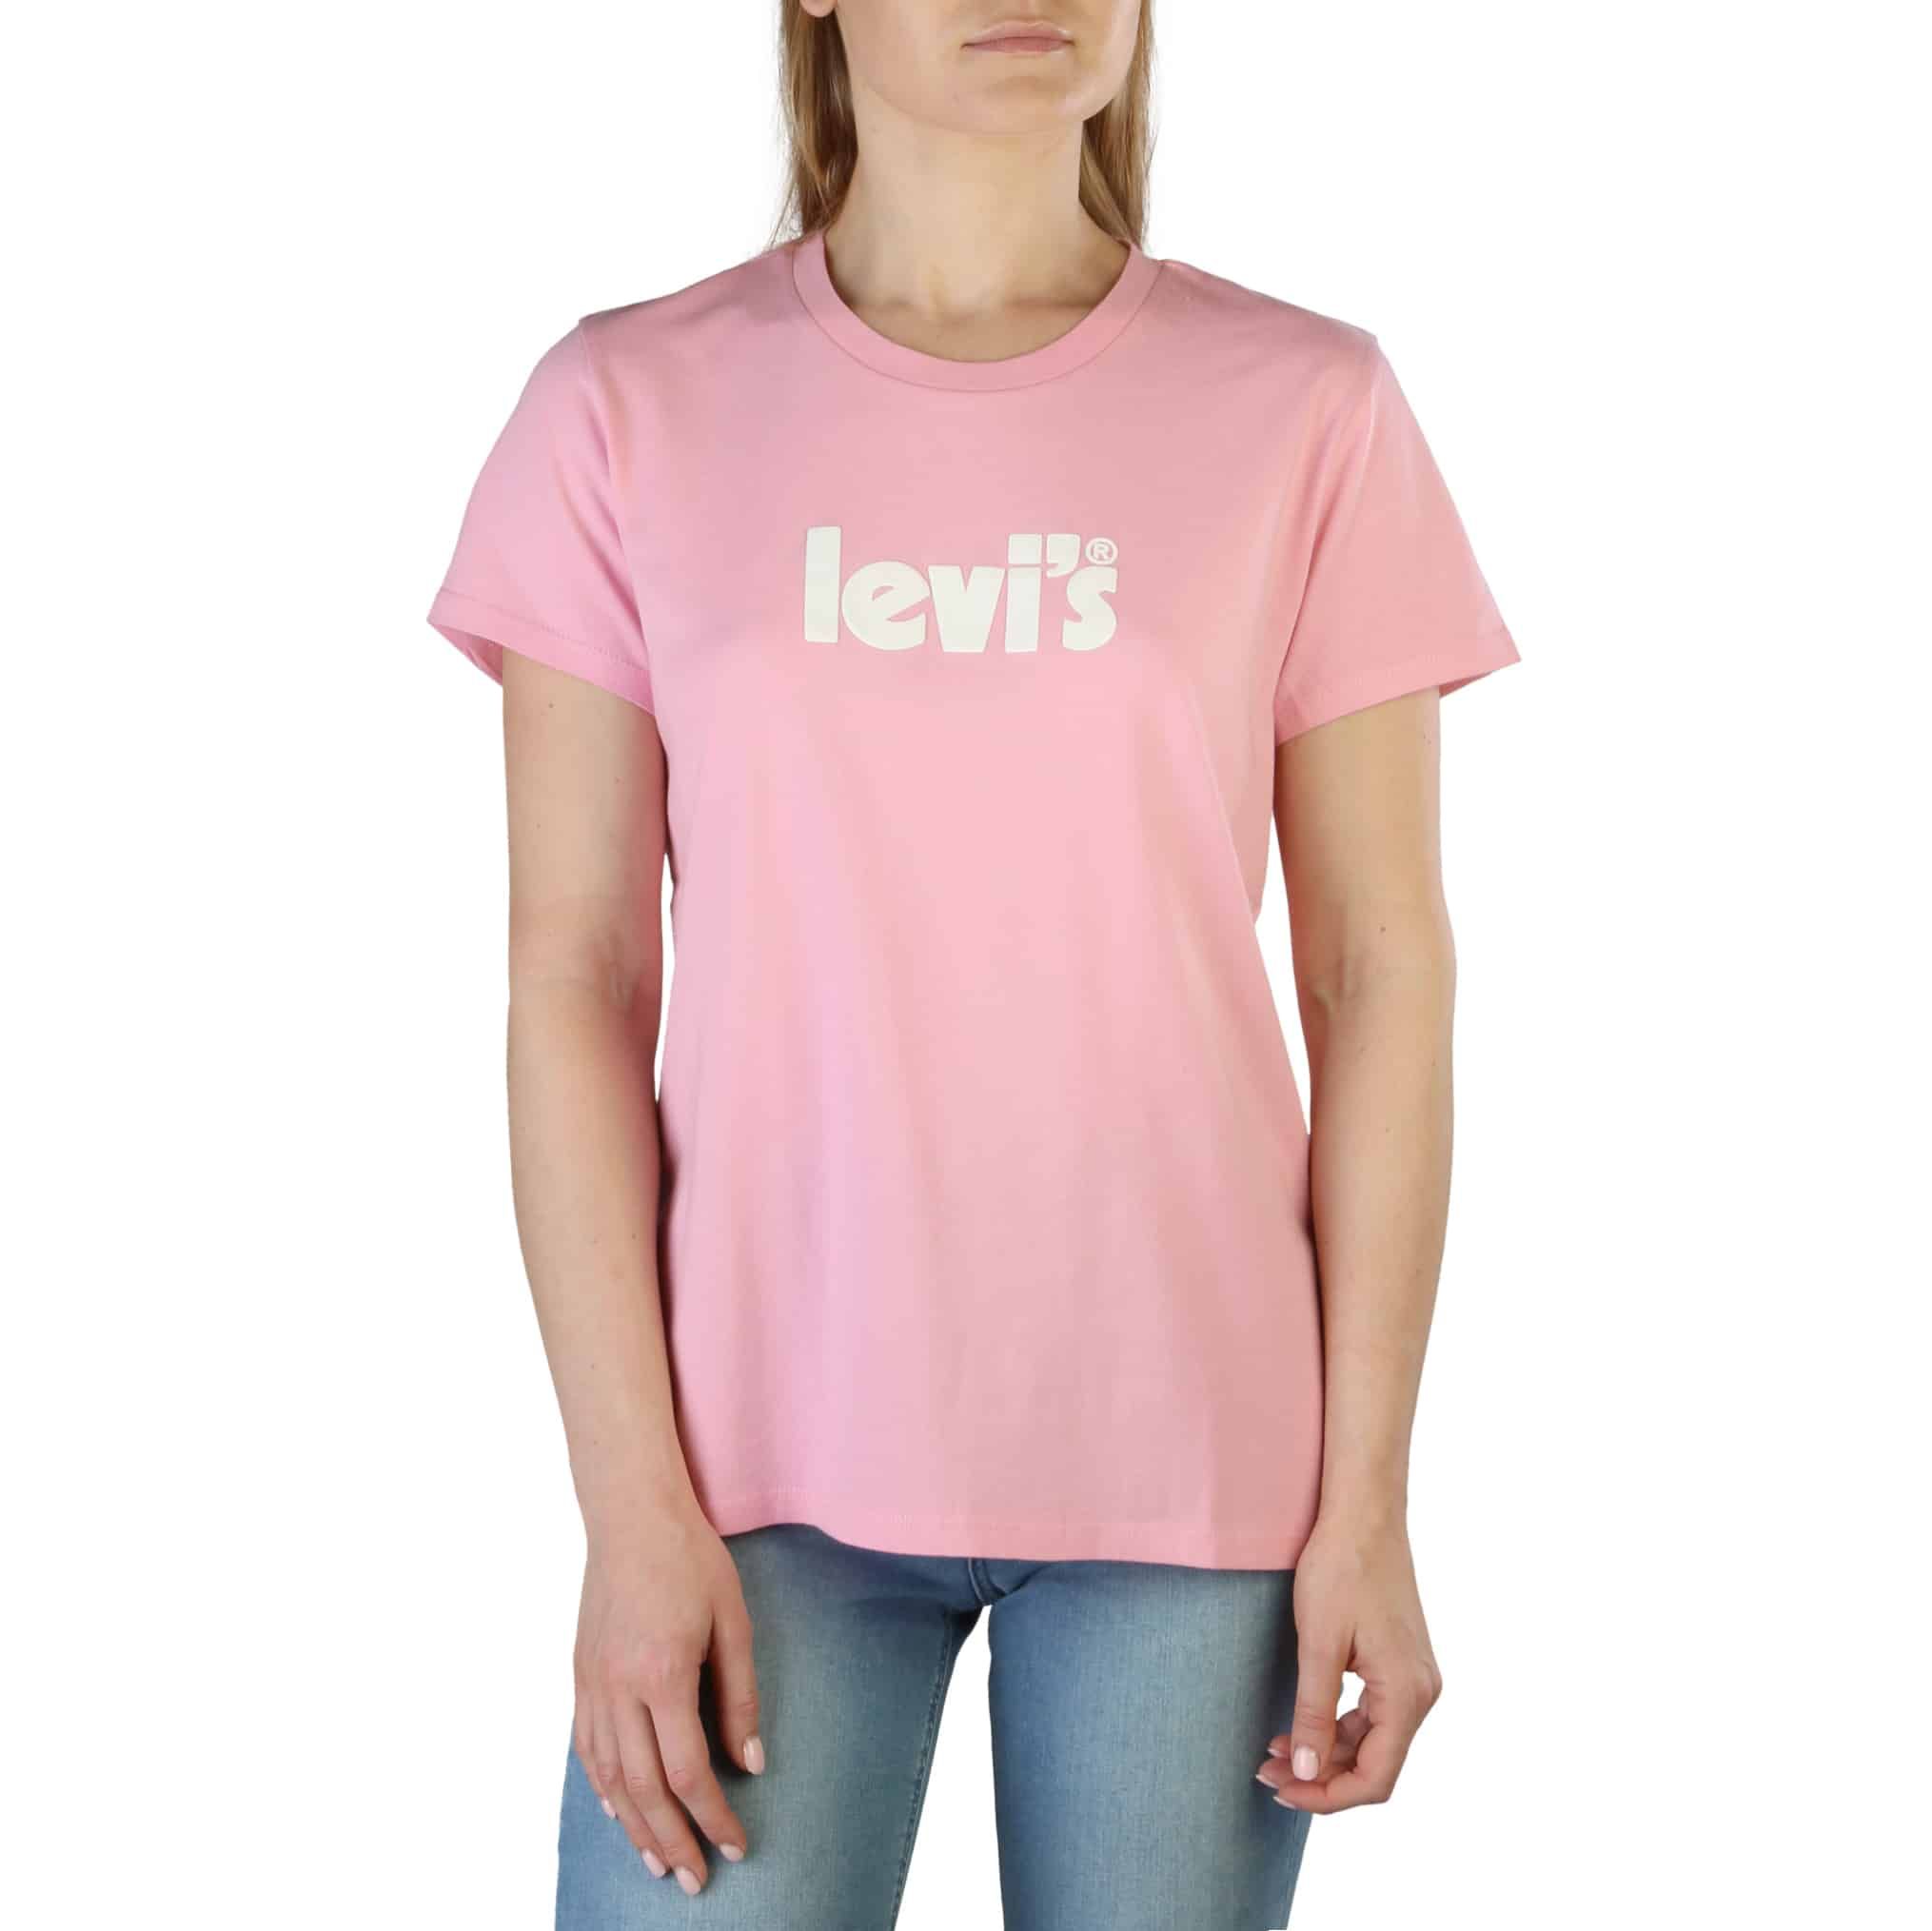 Women Pink Short Sleeves Cotton T-shirt Levis Tshirt 17369_THE-PERFECT